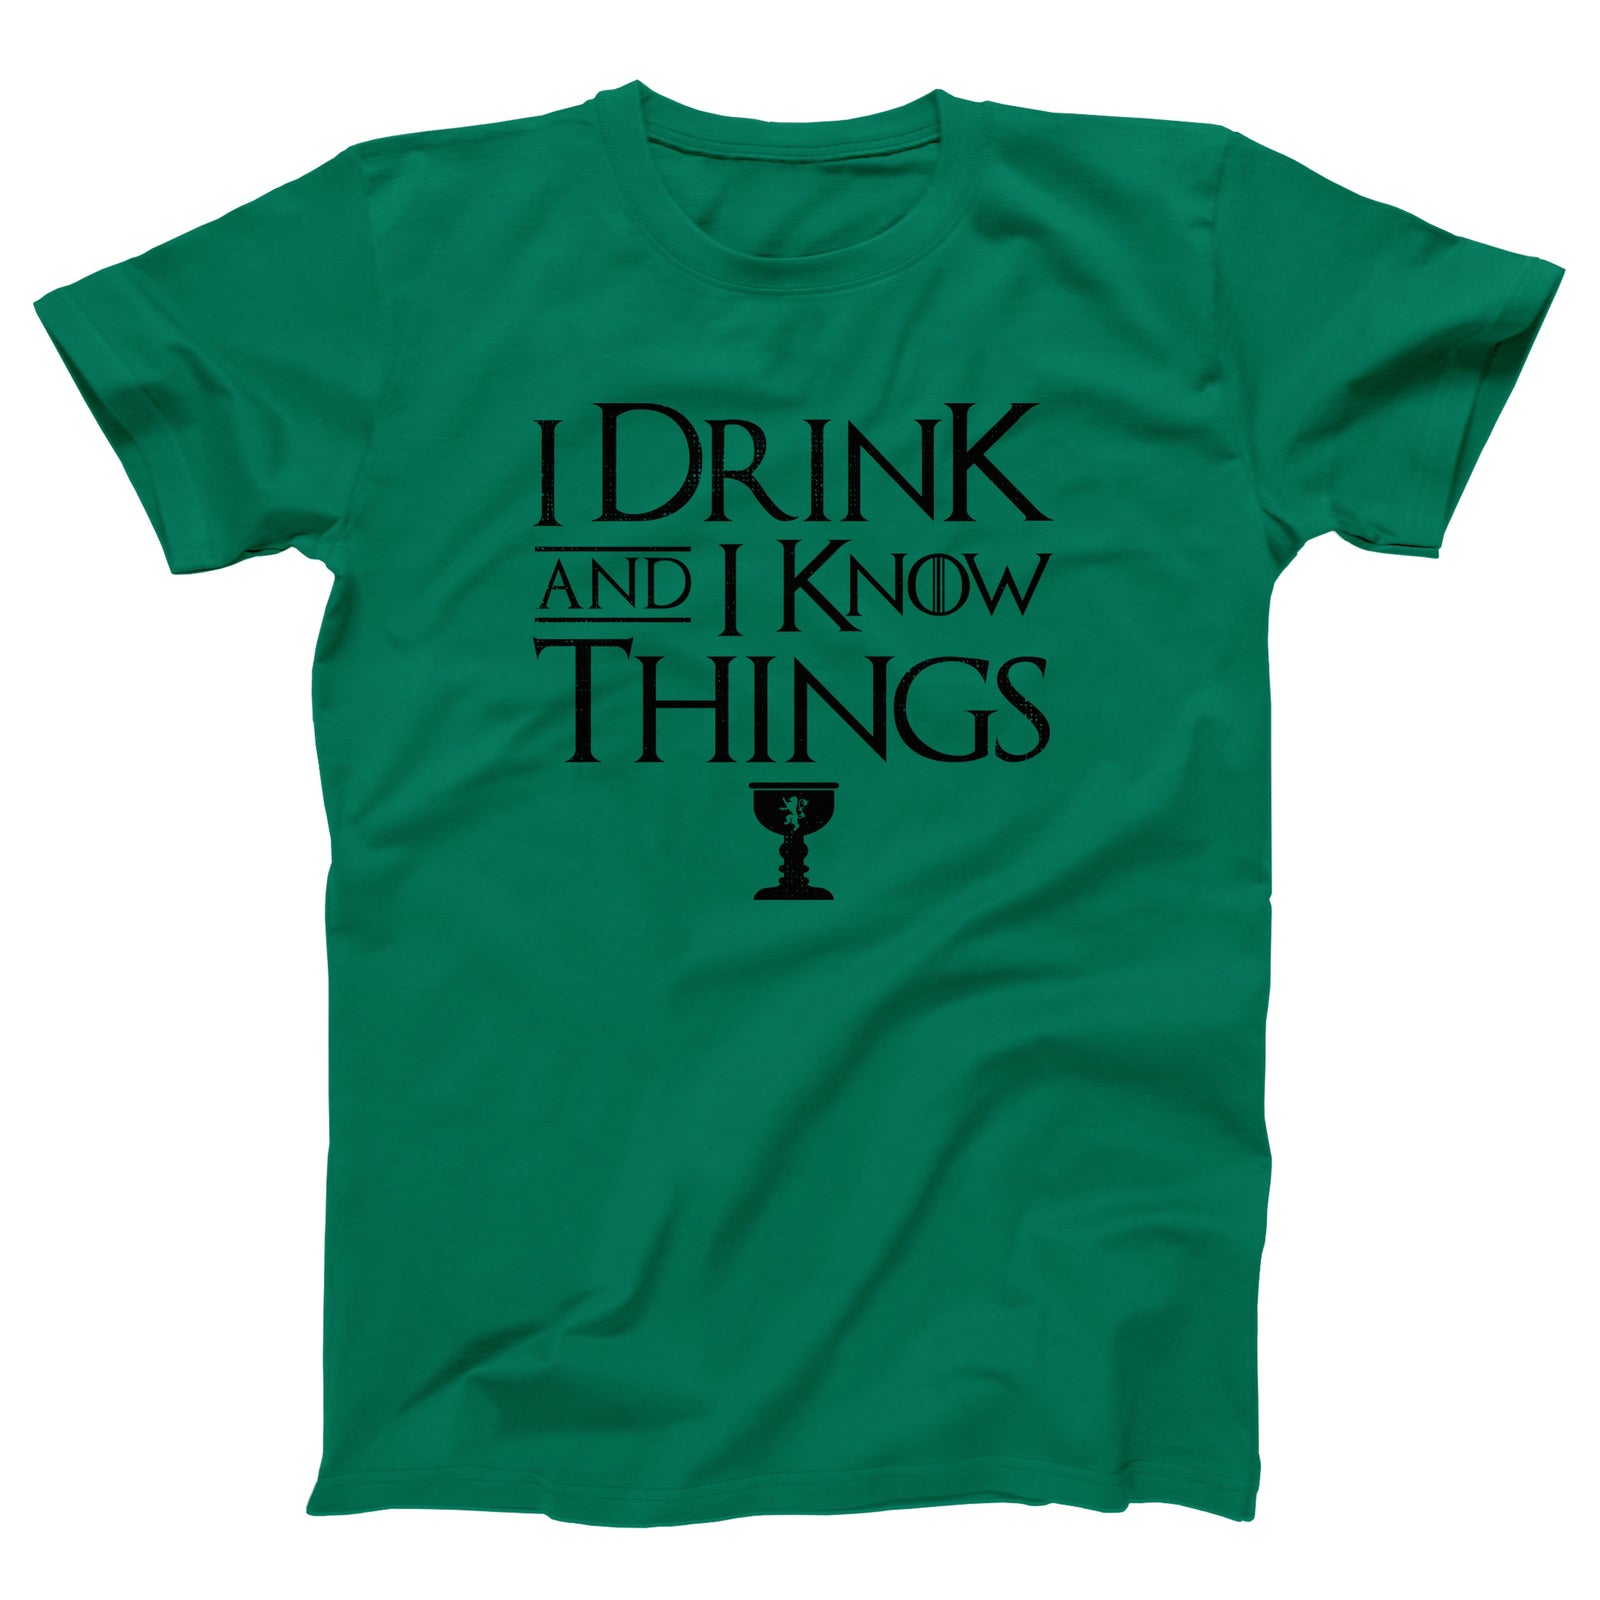 //marionmartigny.com/s/files/1/0274/2488/2766/products/i-drink-and-i-know-things-menunisex-t-shirt-278585_5000x.jpg?v=1662705078 5000w,
    //marionmartigny.com/s/files/1/0274/2488/2766/products/i-drink-and-i-know-things-menunisex-t-shirt-278585_4500x.jpg?v=1662705078 4500w,
    //marionmartigny.com/s/files/1/0274/2488/2766/products/i-drink-and-i-know-things-menunisex-t-shirt-278585_4000x.jpg?v=1662705078 4000w,
    //marionmartigny.com/s/files/1/0274/2488/2766/products/i-drink-and-i-know-things-menunisex-t-shirt-278585_3500x.jpg?v=1662705078 3500w,
    //marionmartigny.com/s/files/1/0274/2488/2766/products/i-drink-and-i-know-things-menunisex-t-shirt-278585_3000x.jpg?v=1662705078 3000w,
    //marionmartigny.com/s/files/1/0274/2488/2766/products/i-drink-and-i-know-things-menunisex-t-shirt-278585_2500x.jpg?v=1662705078 2500w,
    //marionmartigny.com/s/files/1/0274/2488/2766/products/i-drink-and-i-know-things-menunisex-t-shirt-278585_2000x.jpg?v=1662705078 2000w,
    //marionmartigny.com/s/files/1/0274/2488/2766/products/i-drink-and-i-know-things-menunisex-t-shirt-278585_1800x.jpg?v=1662705078 1800w,
    //marionmartigny.com/s/files/1/0274/2488/2766/products/i-drink-and-i-know-things-menunisex-t-shirt-278585_1600x.jpg?v=1662705078 1600w,
    //marionmartigny.com/s/files/1/0274/2488/2766/products/i-drink-and-i-know-things-menunisex-t-shirt-278585_1400x.jpg?v=1662705078 1400w,
    //marionmartigny.com/s/files/1/0274/2488/2766/products/i-drink-and-i-know-things-menunisex-t-shirt-278585_1200x.jpg?v=1662705078 1200w,
    //marionmartigny.com/s/files/1/0274/2488/2766/products/i-drink-and-i-know-things-menunisex-t-shirt-278585_1000x.jpg?v=1662705078 1000w,
    //marionmartigny.com/s/files/1/0274/2488/2766/products/i-drink-and-i-know-things-menunisex-t-shirt-278585_800x.jpg?v=1662705078 800w,
    //marionmartigny.com/s/files/1/0274/2488/2766/products/i-drink-and-i-know-things-menunisex-t-shirt-278585_600x.jpg?v=1662705078 600w,
    //marionmartigny.com/s/files/1/0274/2488/2766/products/i-drink-and-i-know-things-menunisex-t-shirt-278585_400x.jpg?v=1662705078 400w,
    //marionmartigny.com/s/files/1/0274/2488/2766/products/i-drink-and-i-know-things-menunisex-t-shirt-278585_200x.jpg?v=1662705078 200w